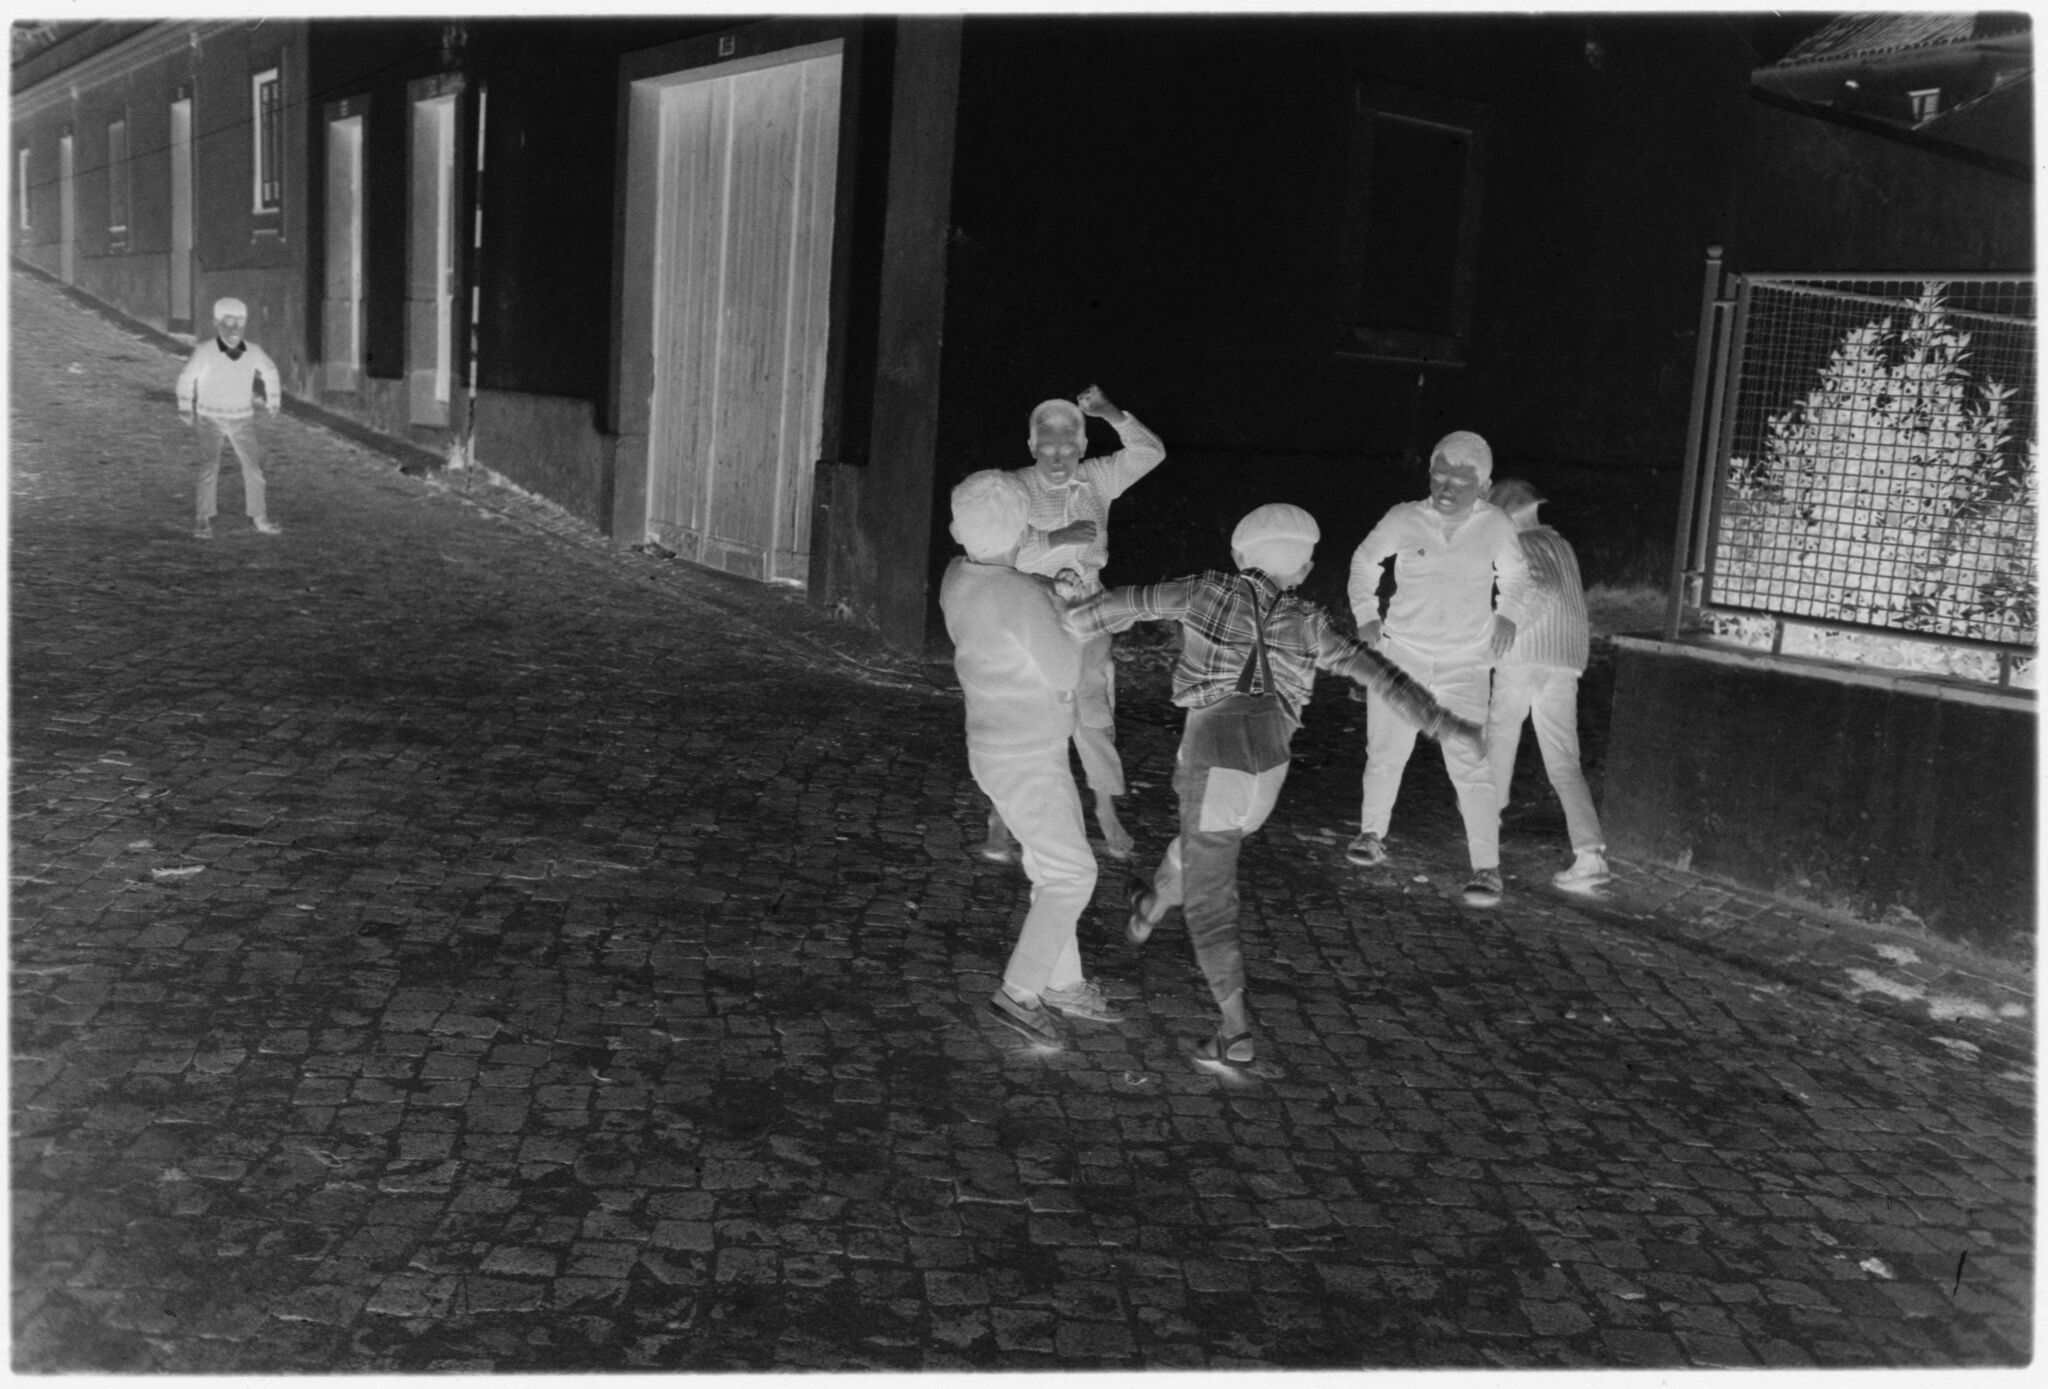 Untitled (Children Playing In The Street, Nazaré, Portugal)